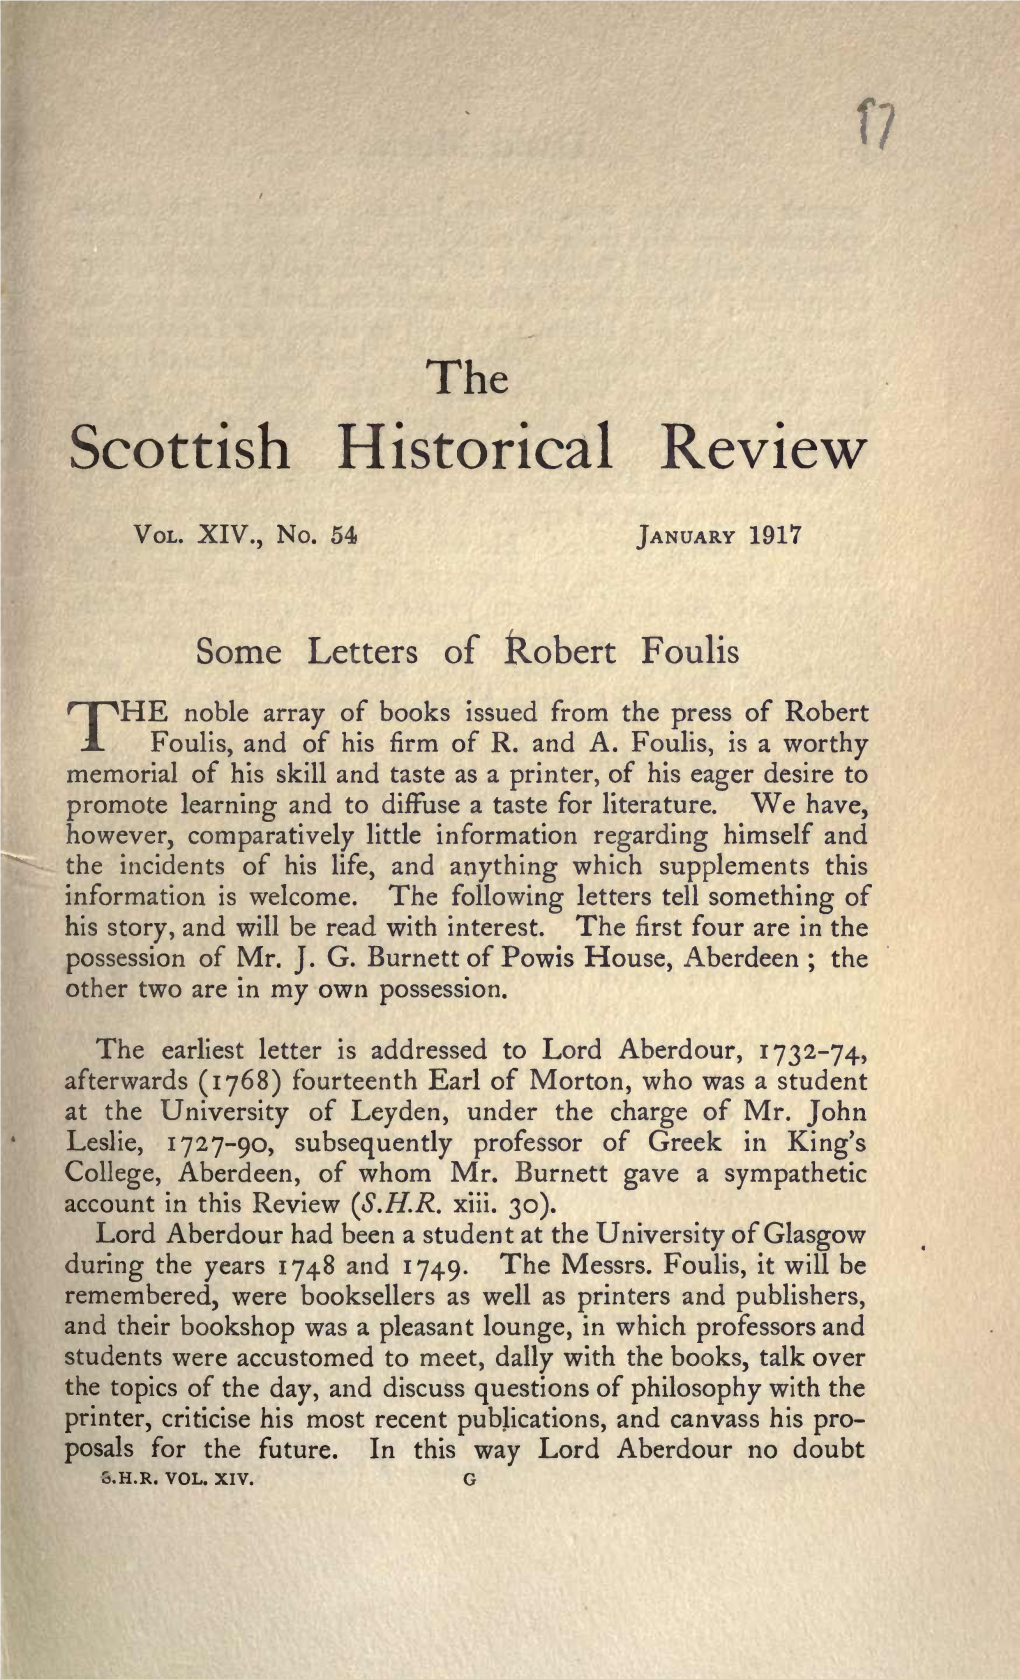 The Scottish Historical Review